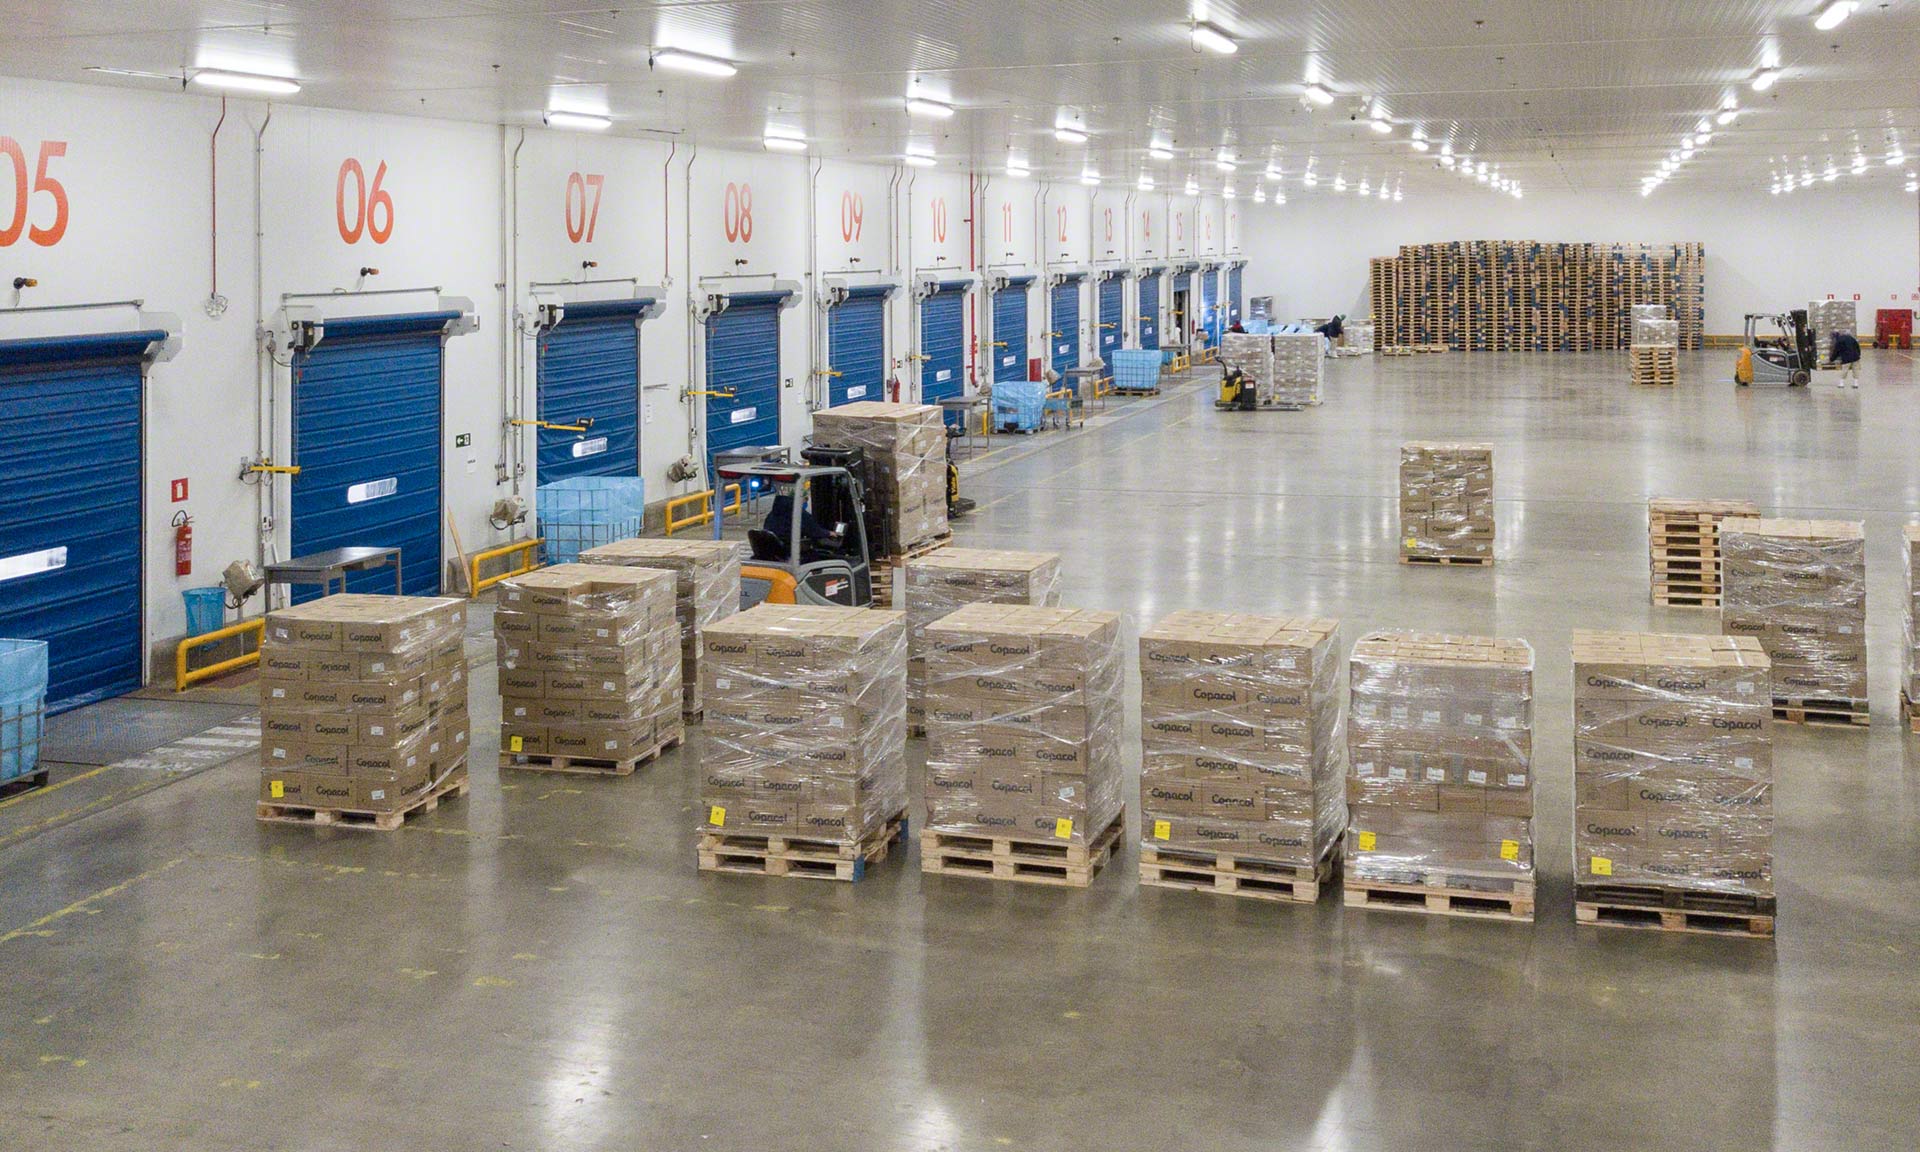 Consolidation and deconsolidation cross-docking: what are they?